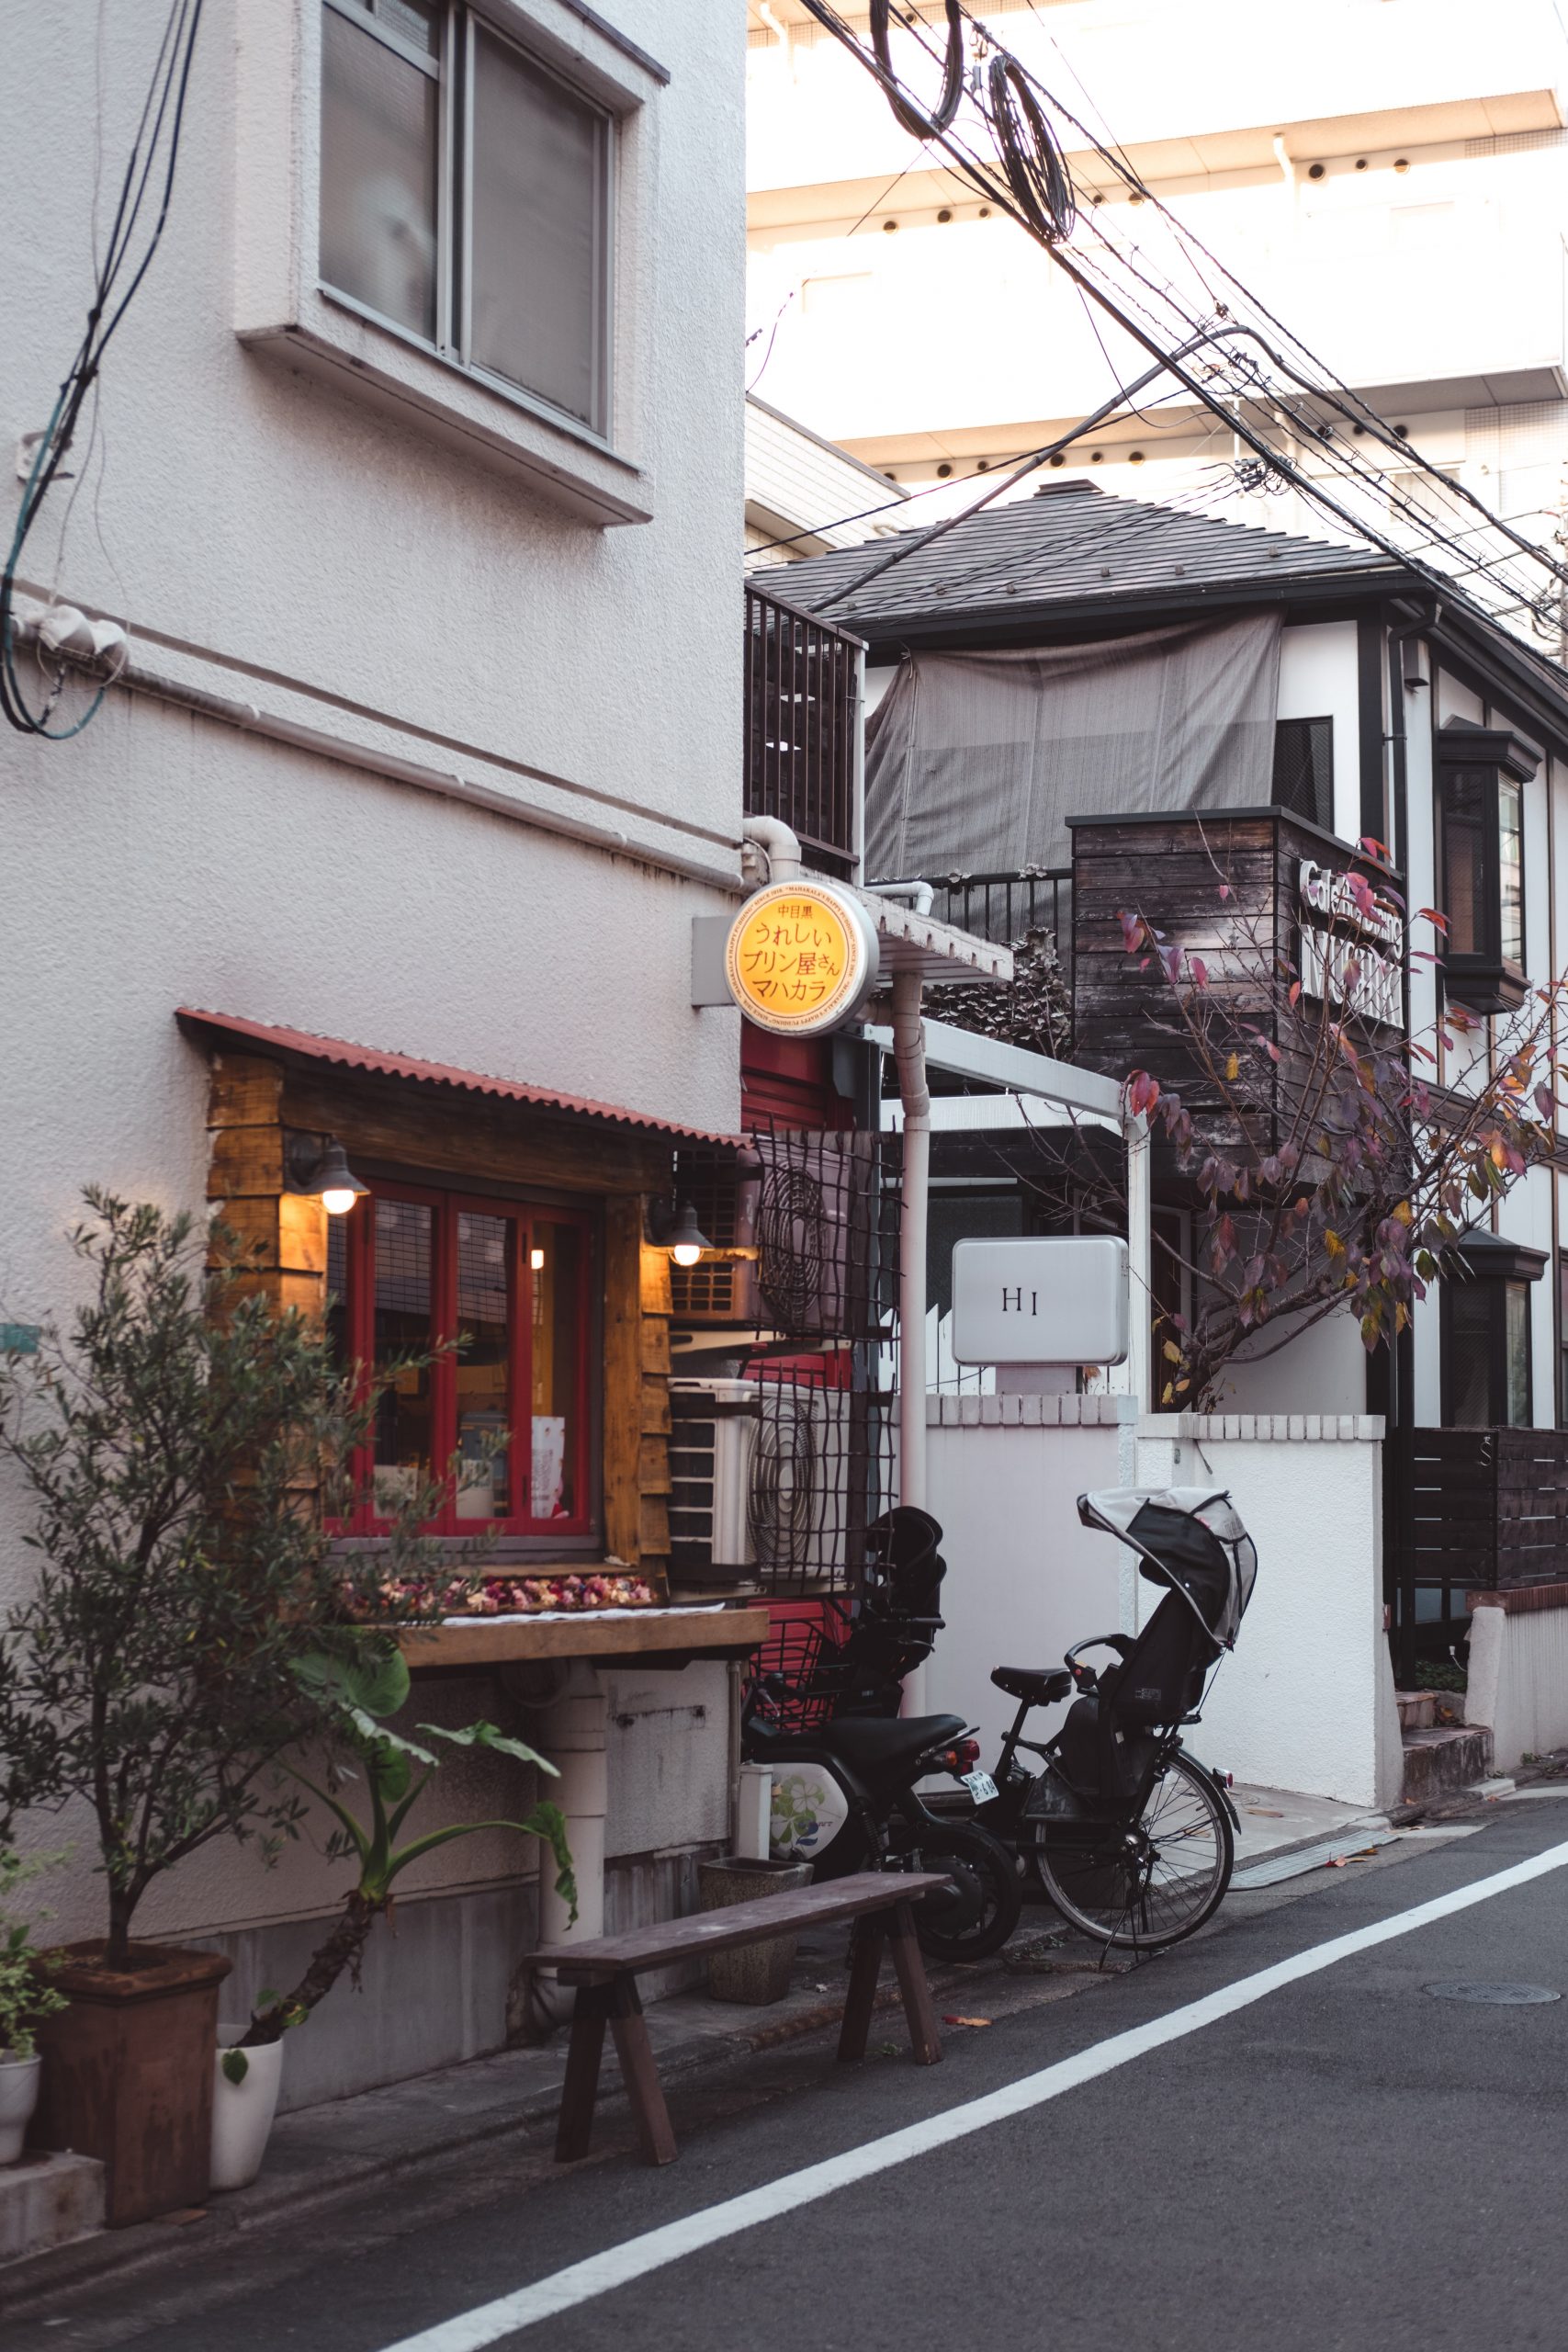 Cool places to visit in Nakameguro